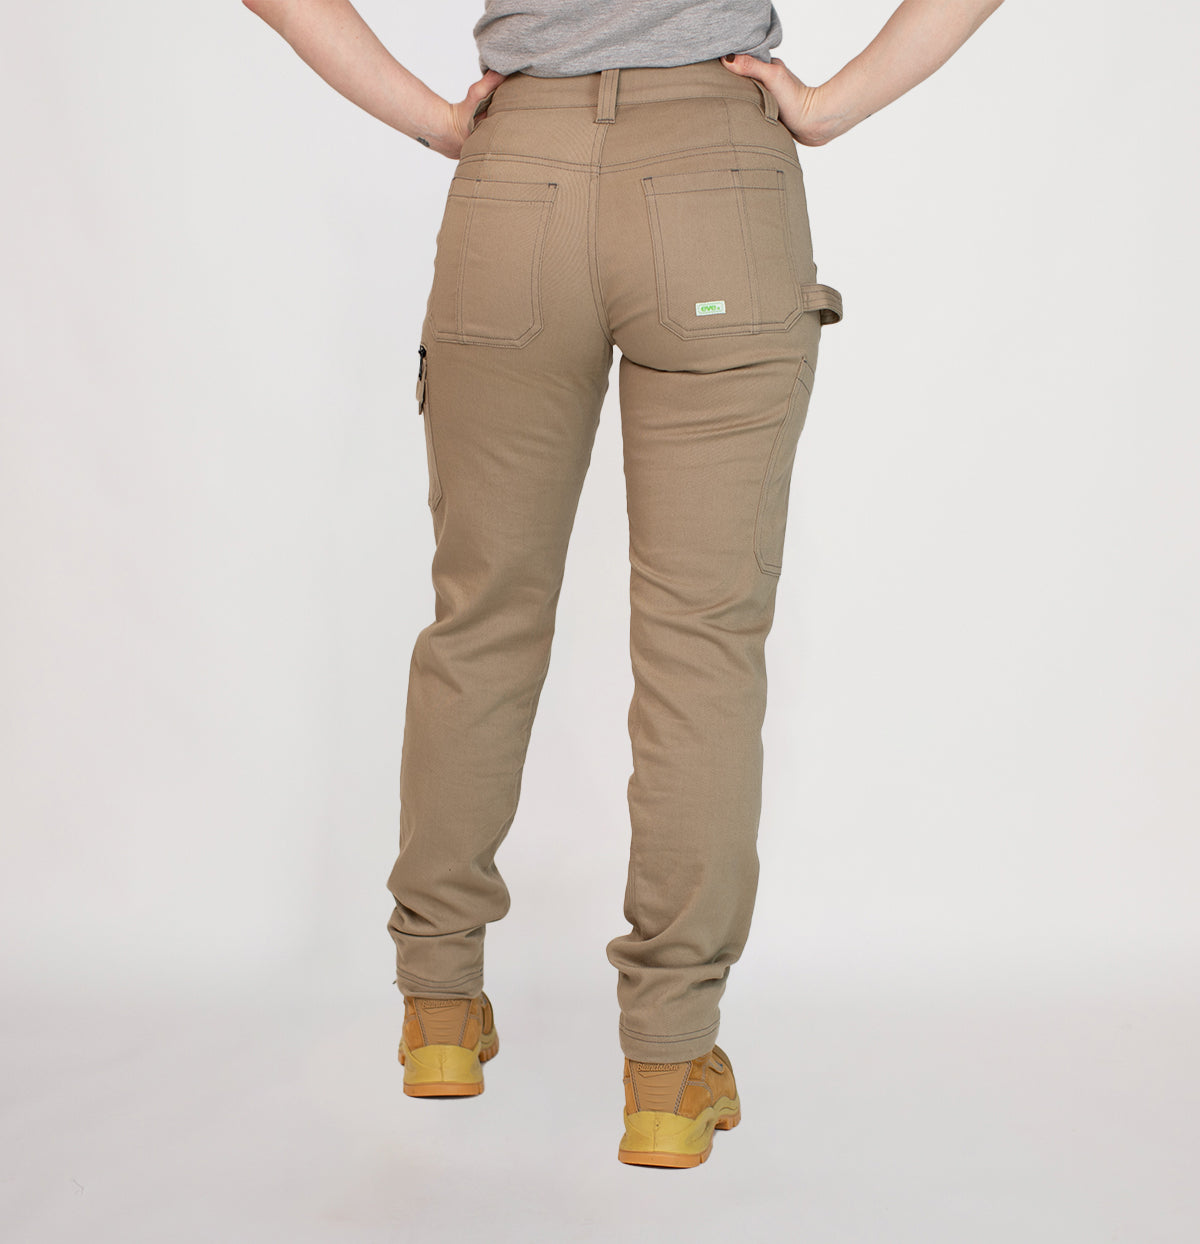 Thread Theory Morden Work Pants  The Fold Line